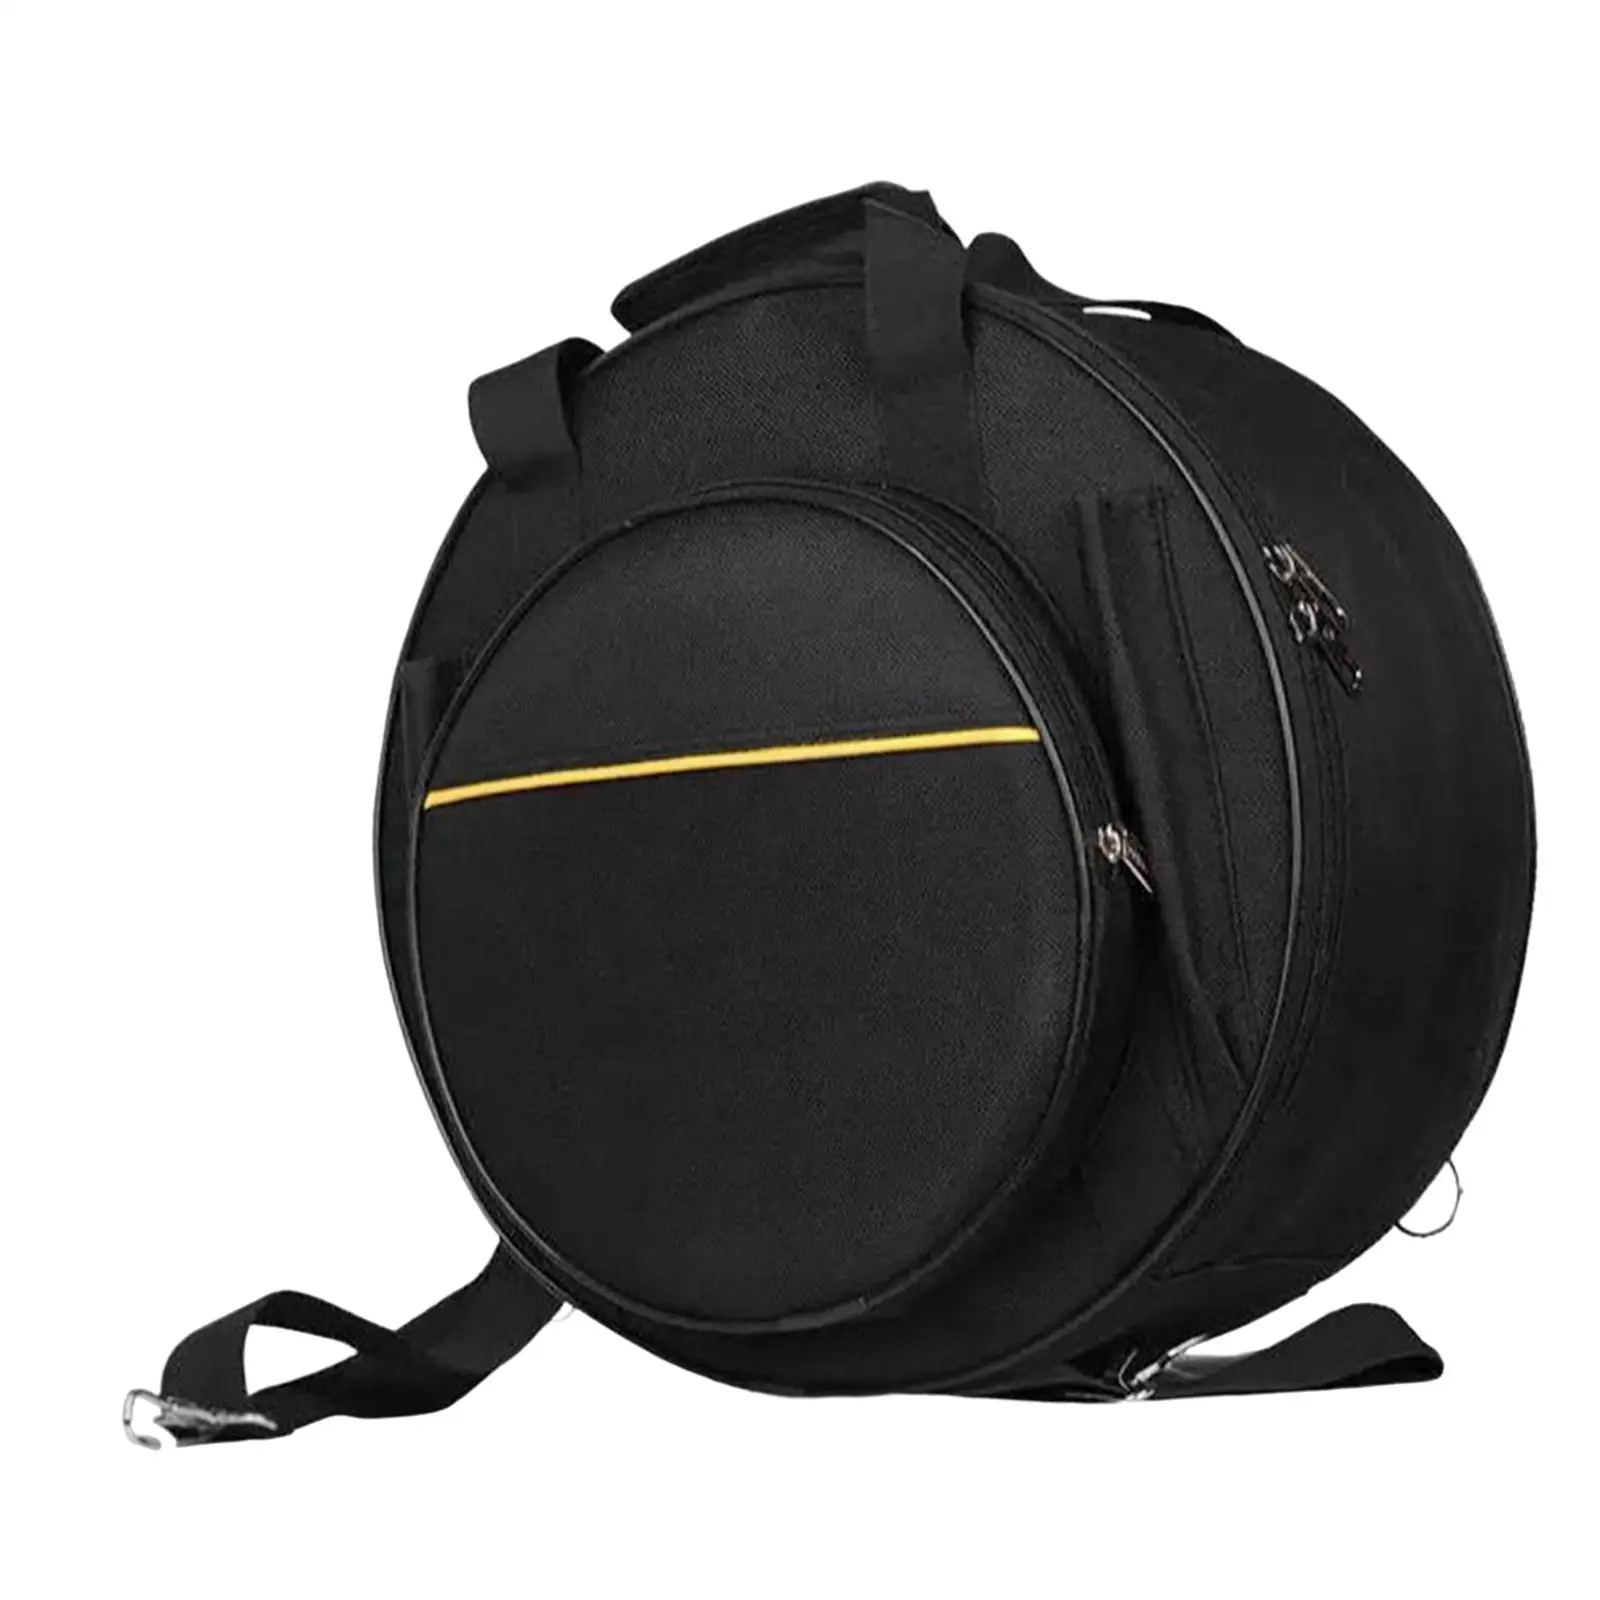 Snare Drum Bag with Pocket Snare Drum Carrying Bag Case for Outdoor Travel Perform